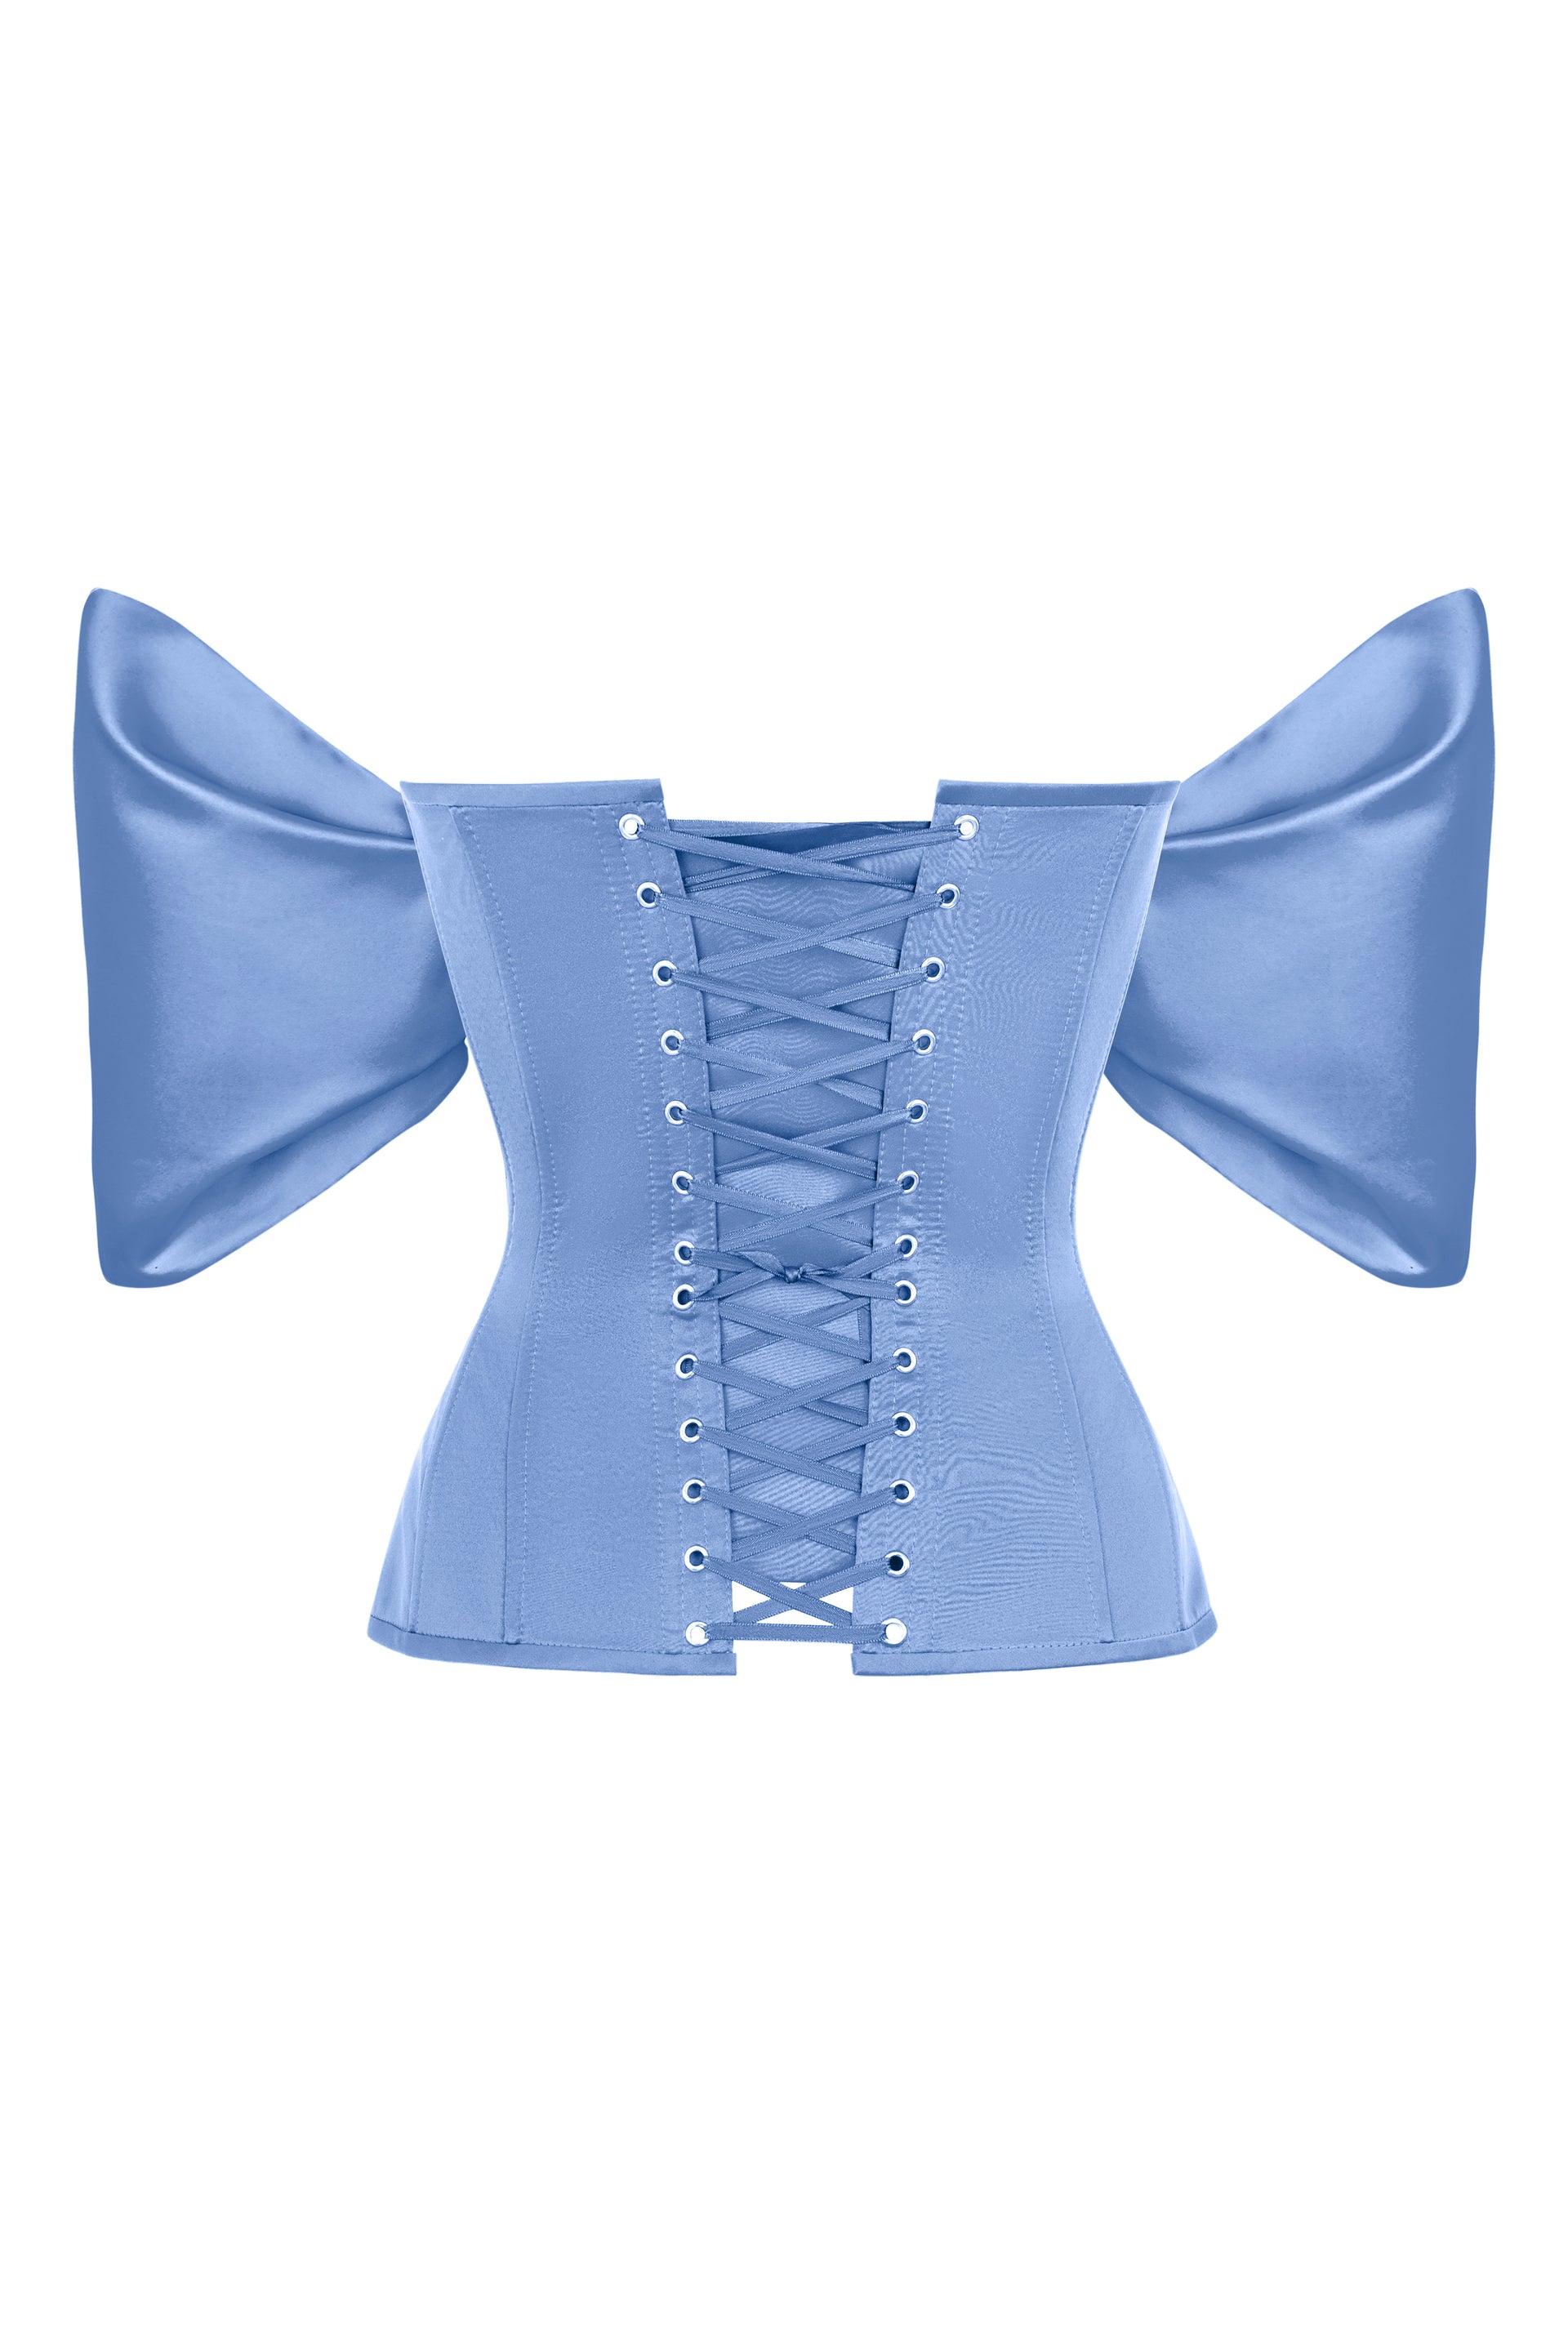 STATNAIA l Jeans blue satin corset with detachable sleeves